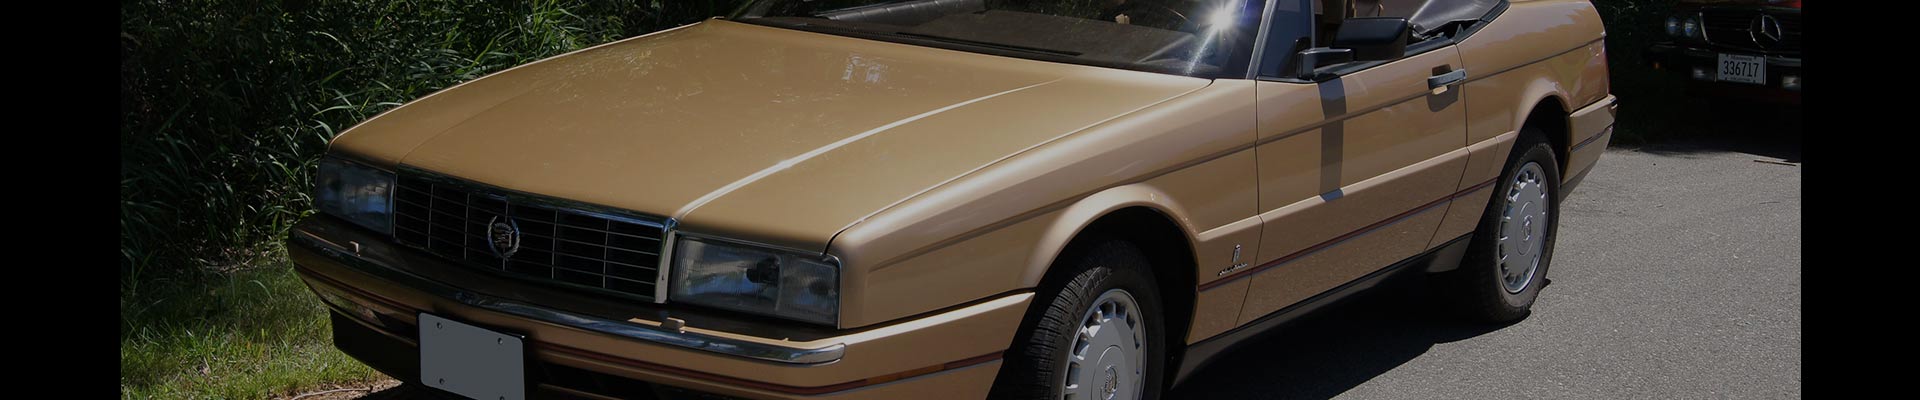 Shop Replacement and OEM 1988 Cadillac Allante Parts with Discounted Price on the Net